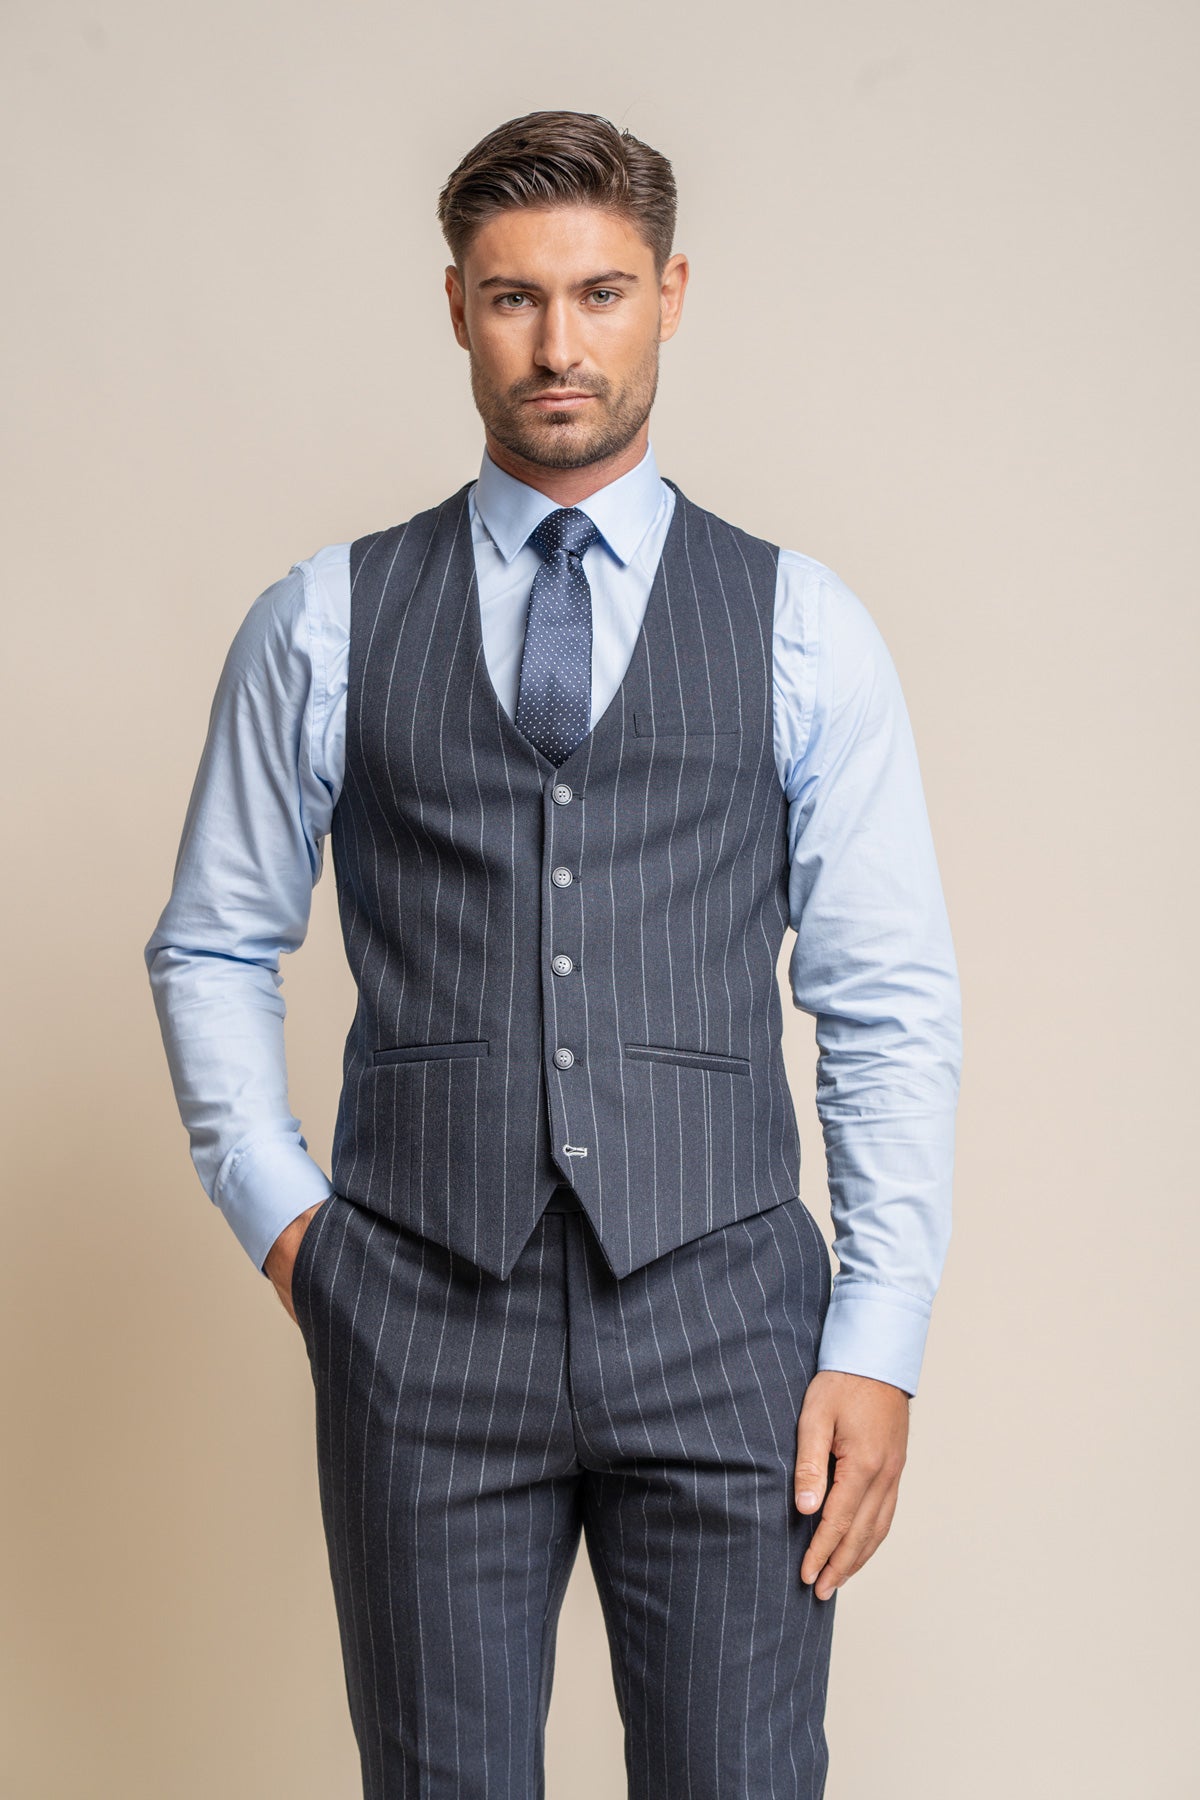 Invincible Navy Pinstripe 3 Piece Wedding Suit - Suits - - Swagger & Swoon